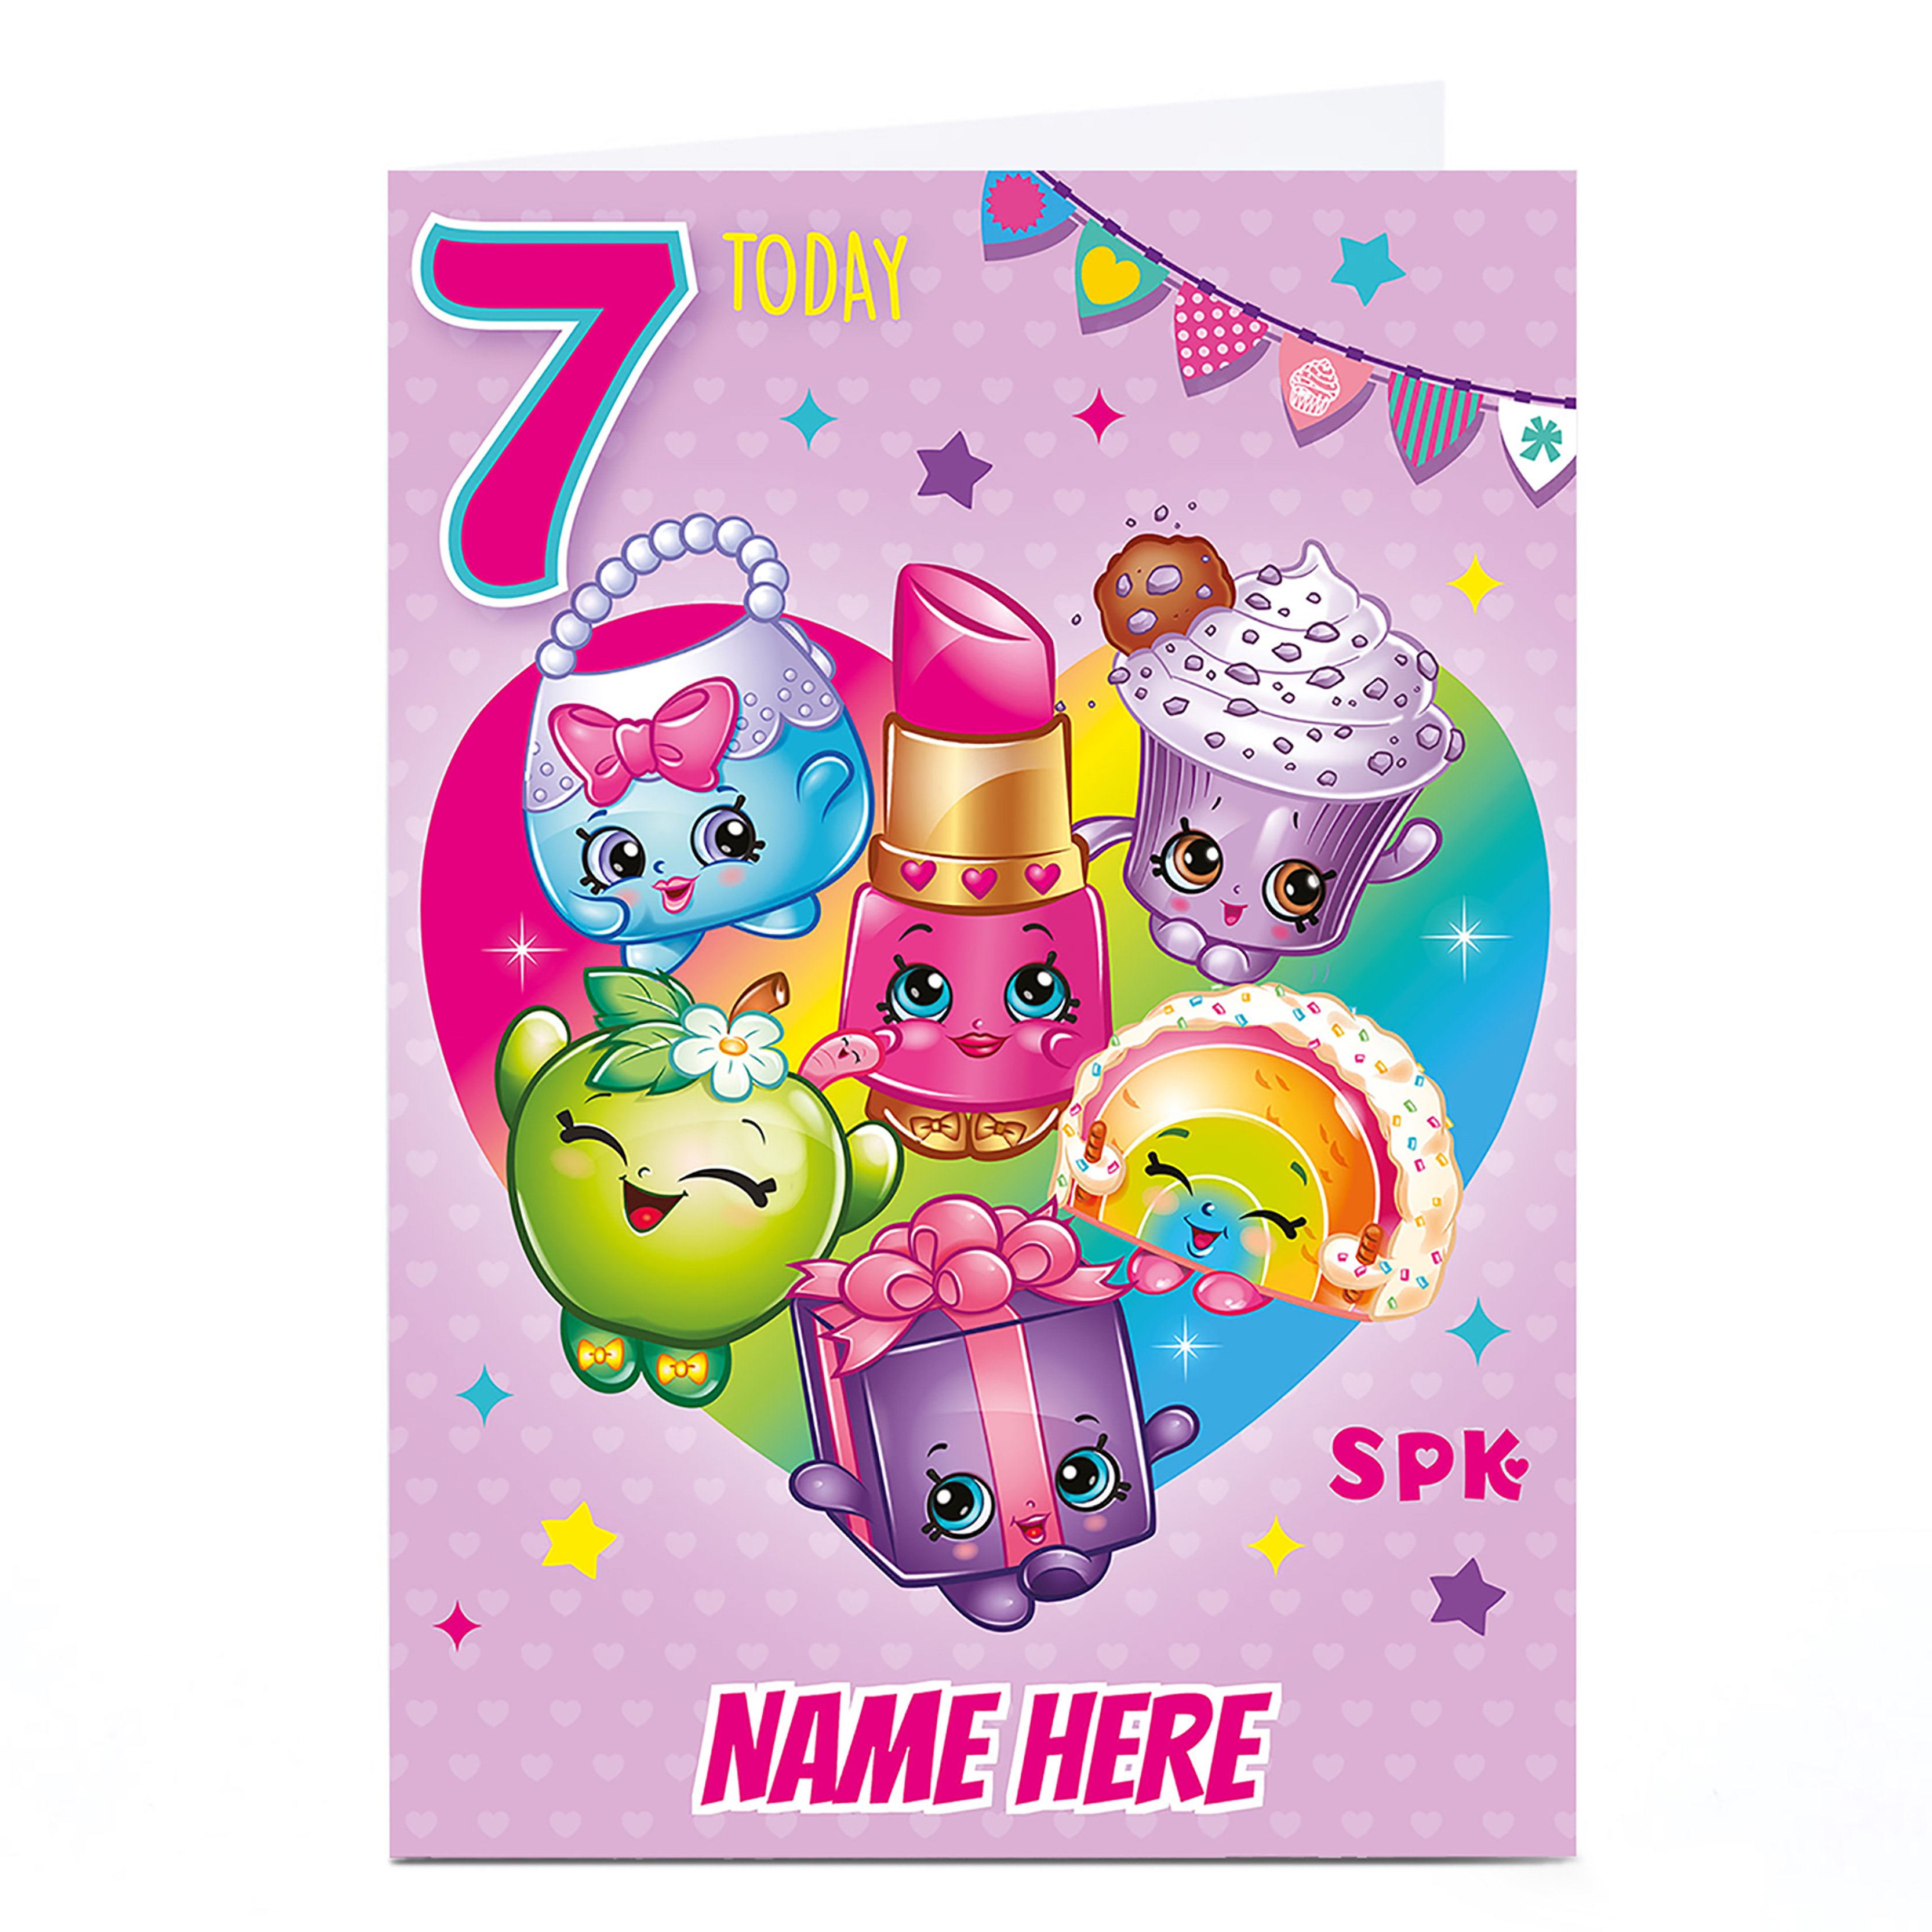 Personalised Shopkins Card - 7 Today